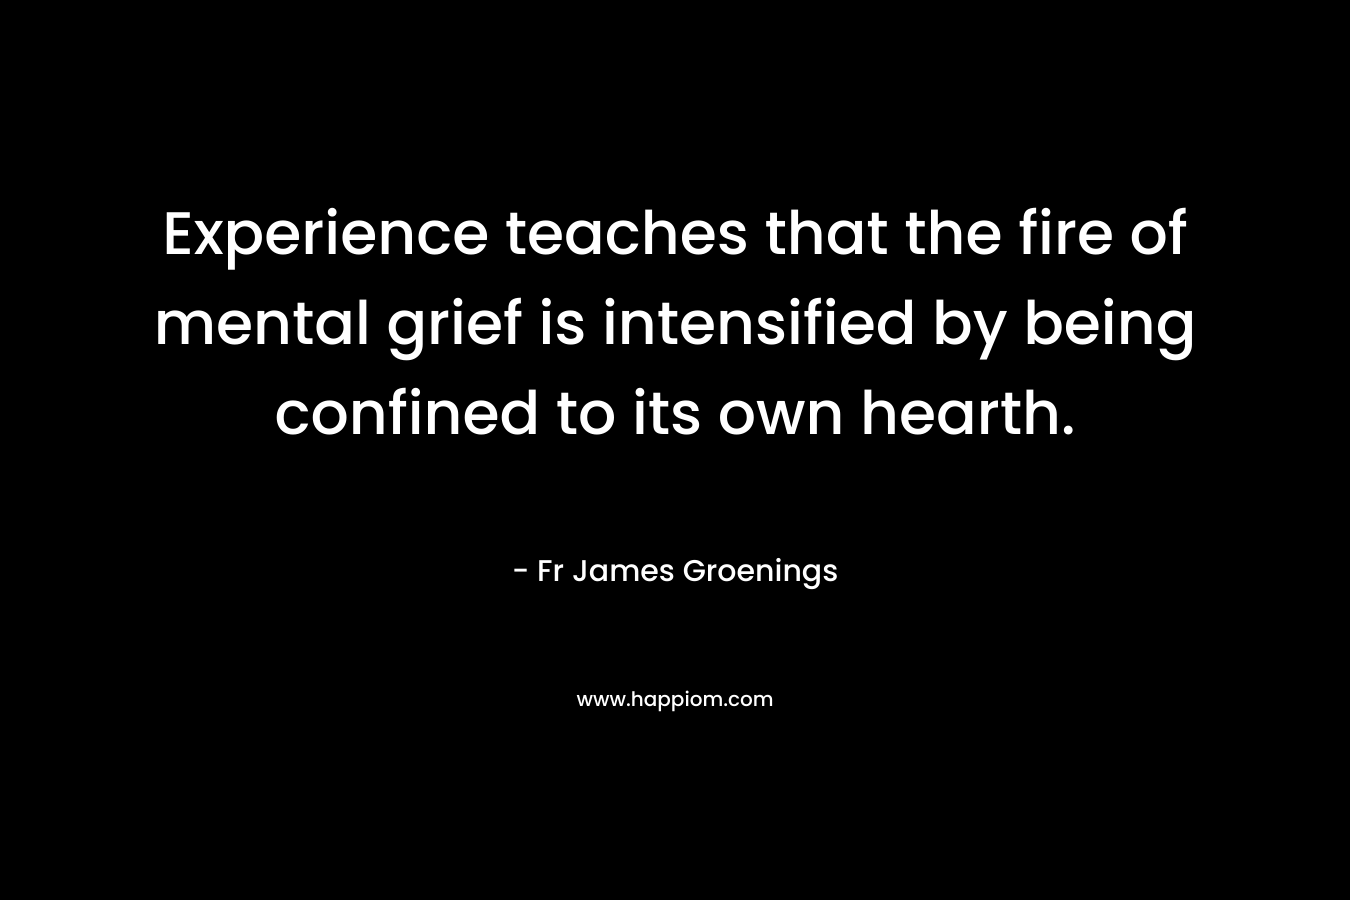 Experience teaches that the fire of mental grief is intensified by being confined to its own hearth. – Fr James Groenings